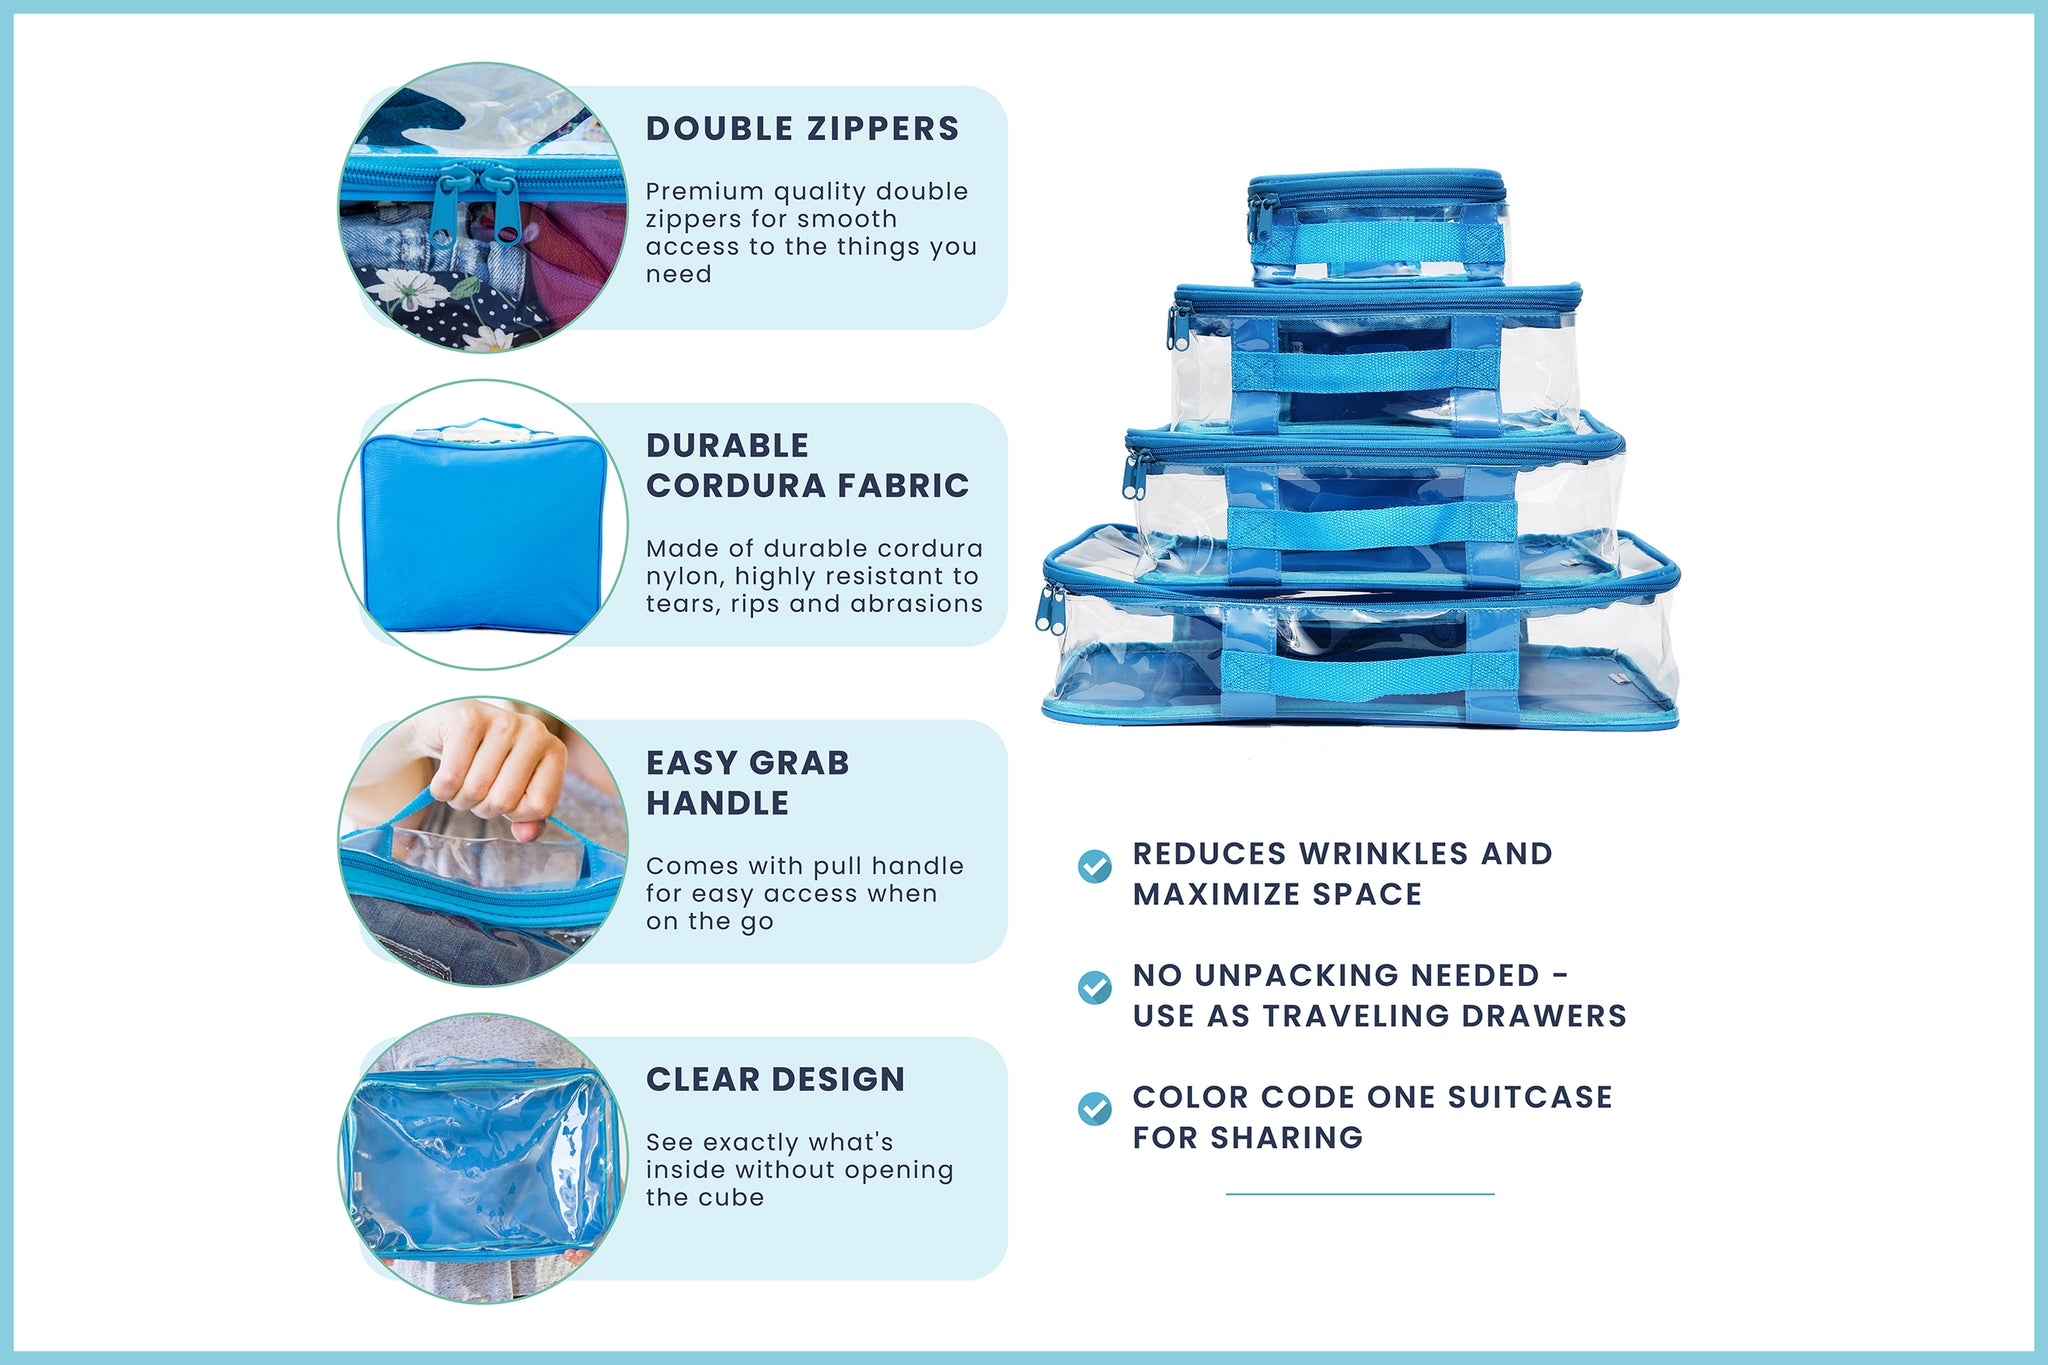 EzPacking Clear Packing Cubes Starter Set Review